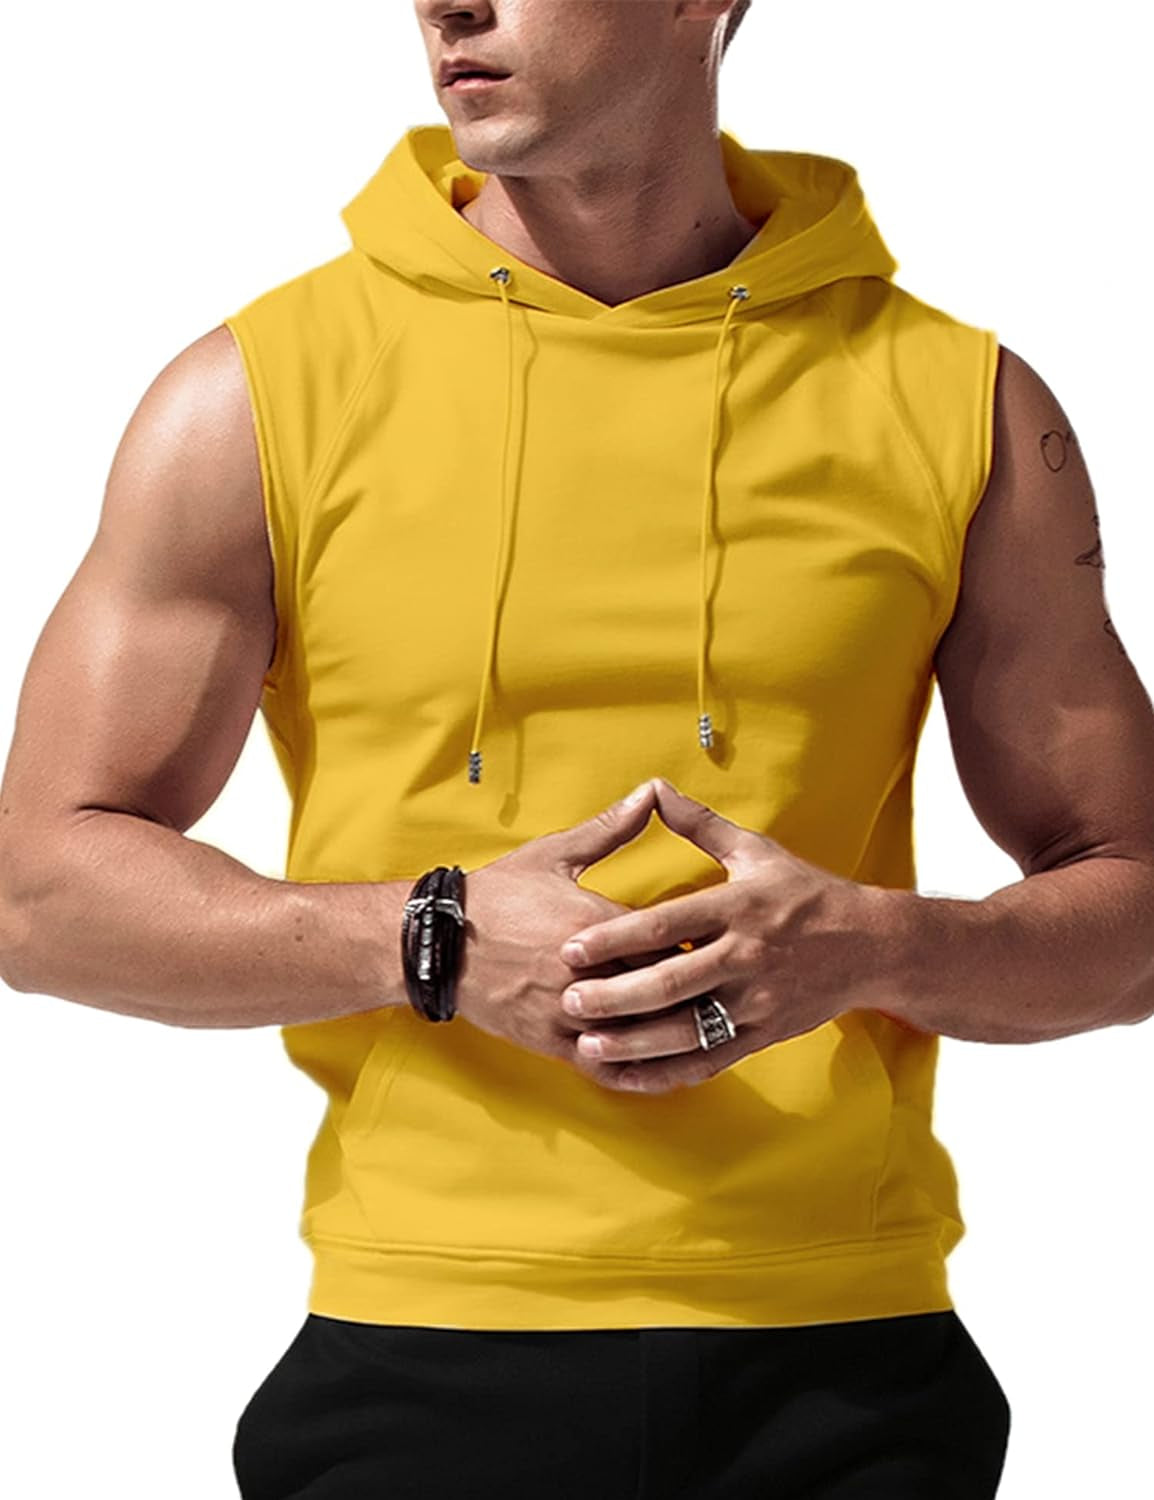 Men'S Workout Hooded Tank Tops Sleeveless Gym Hoodies Bodybuilding Muscle Cut off T-Shirts